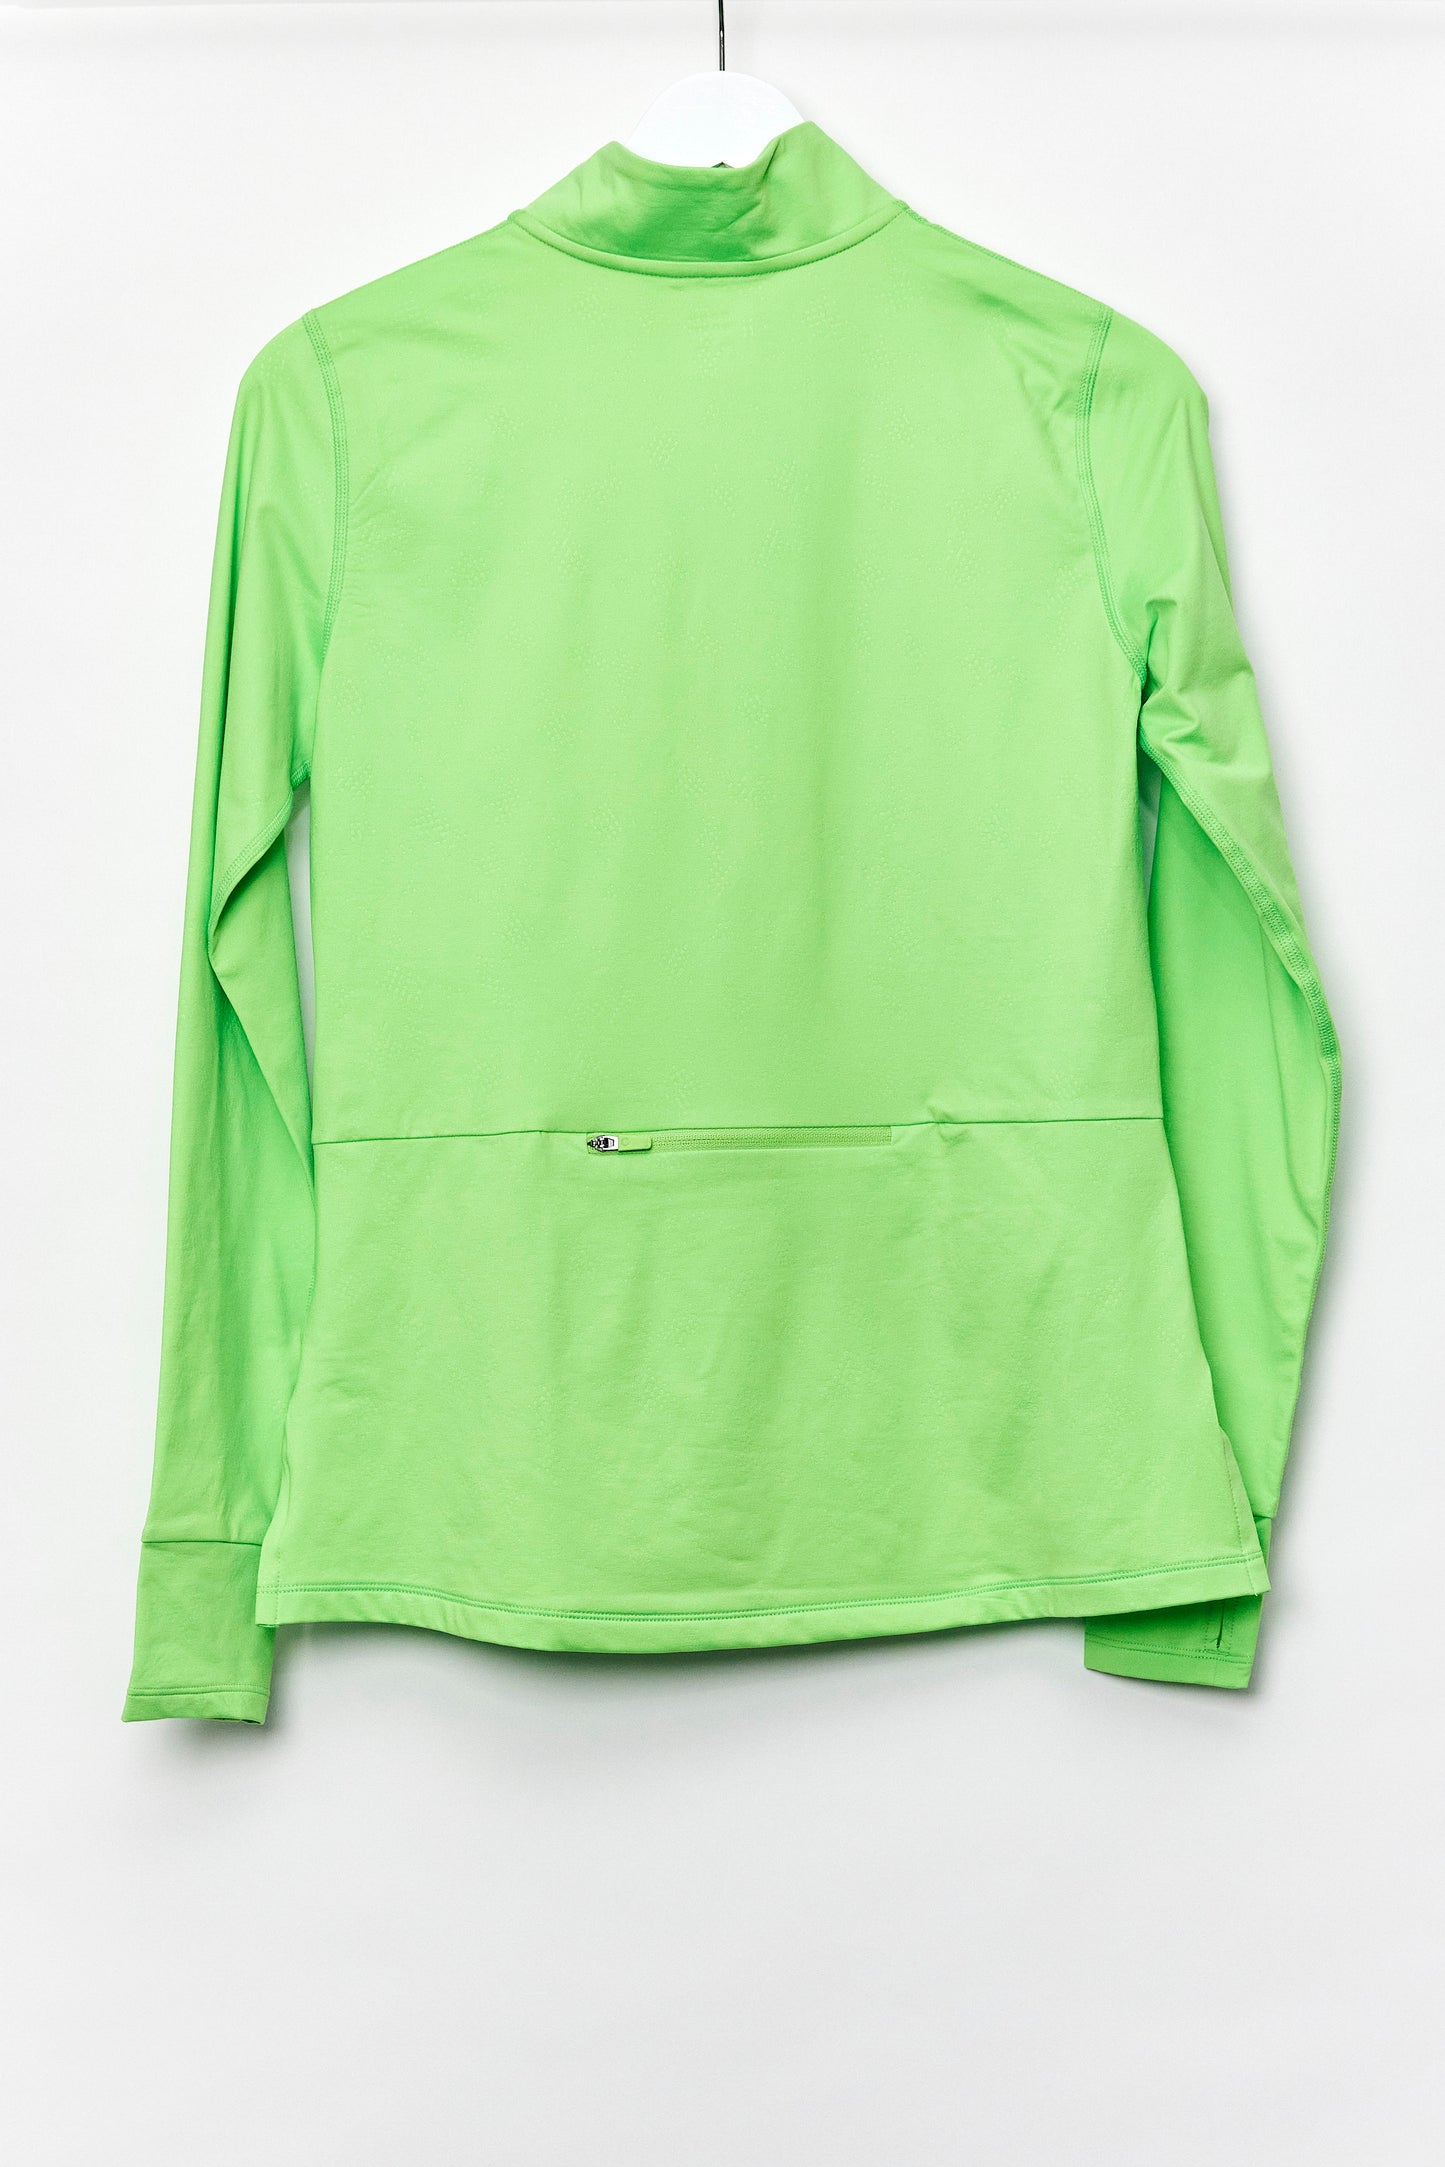 Womens M&S Move Lime Green Sport Top size Small